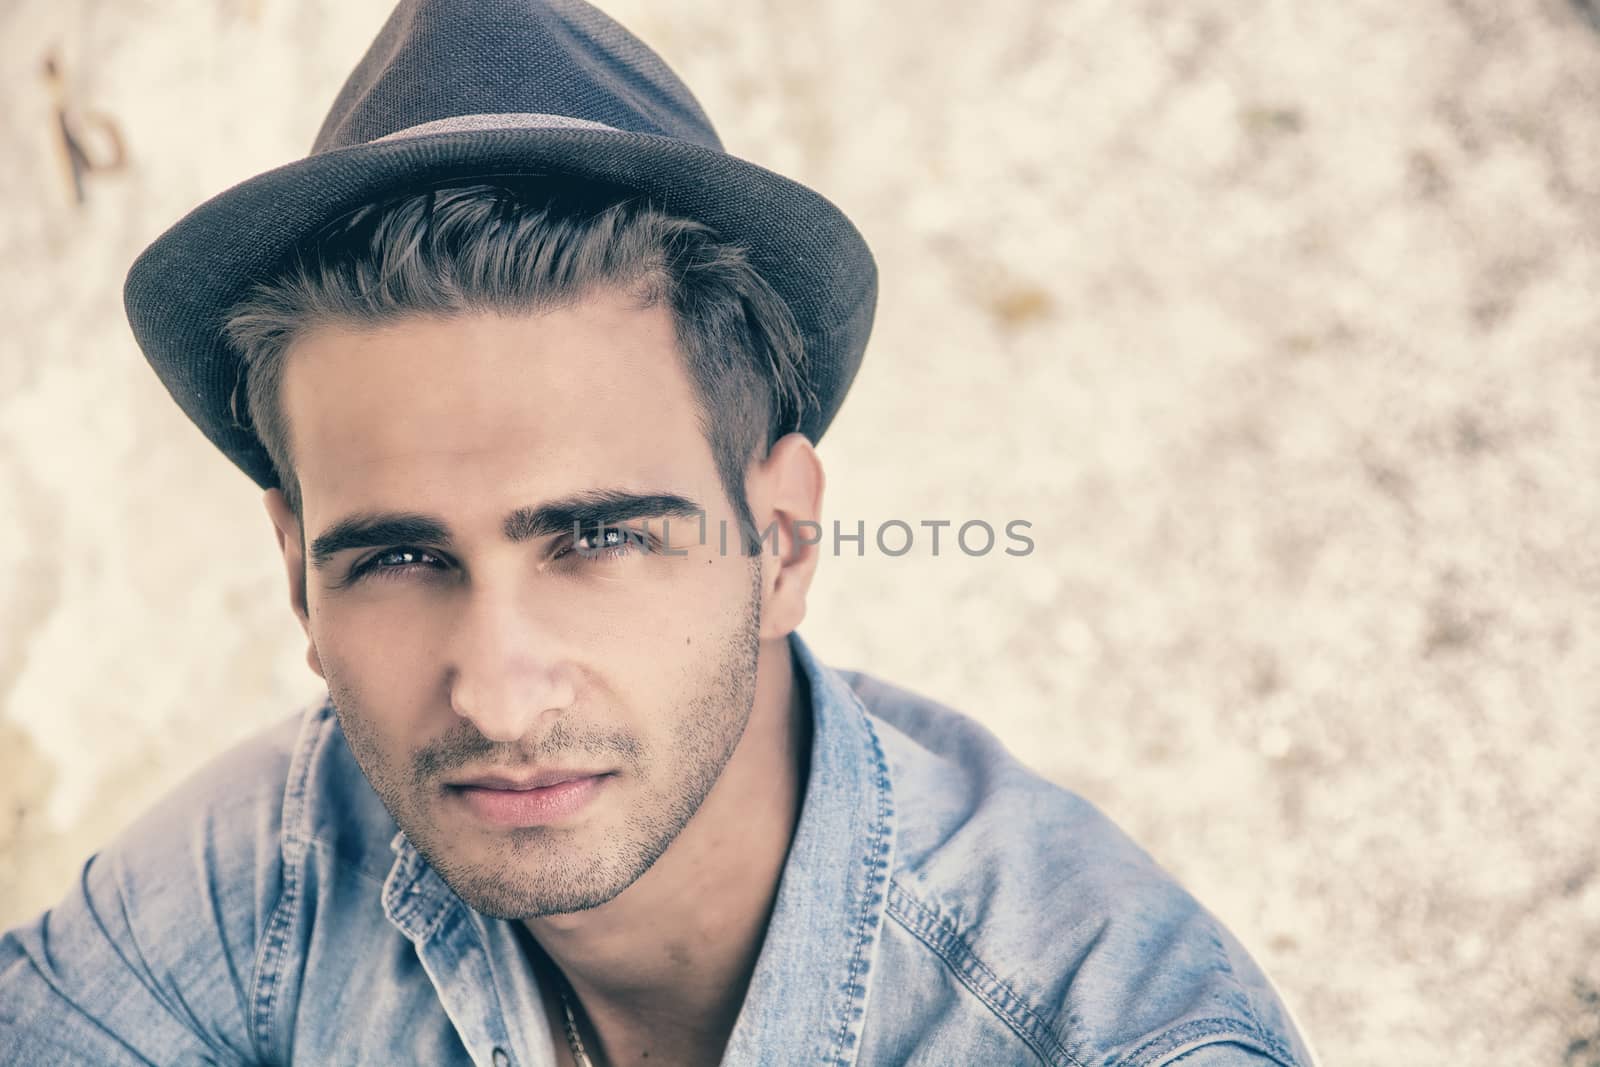 Handsome young, man in denim shirt and fedora hat sitting in pose on sandy beach and looking at camera